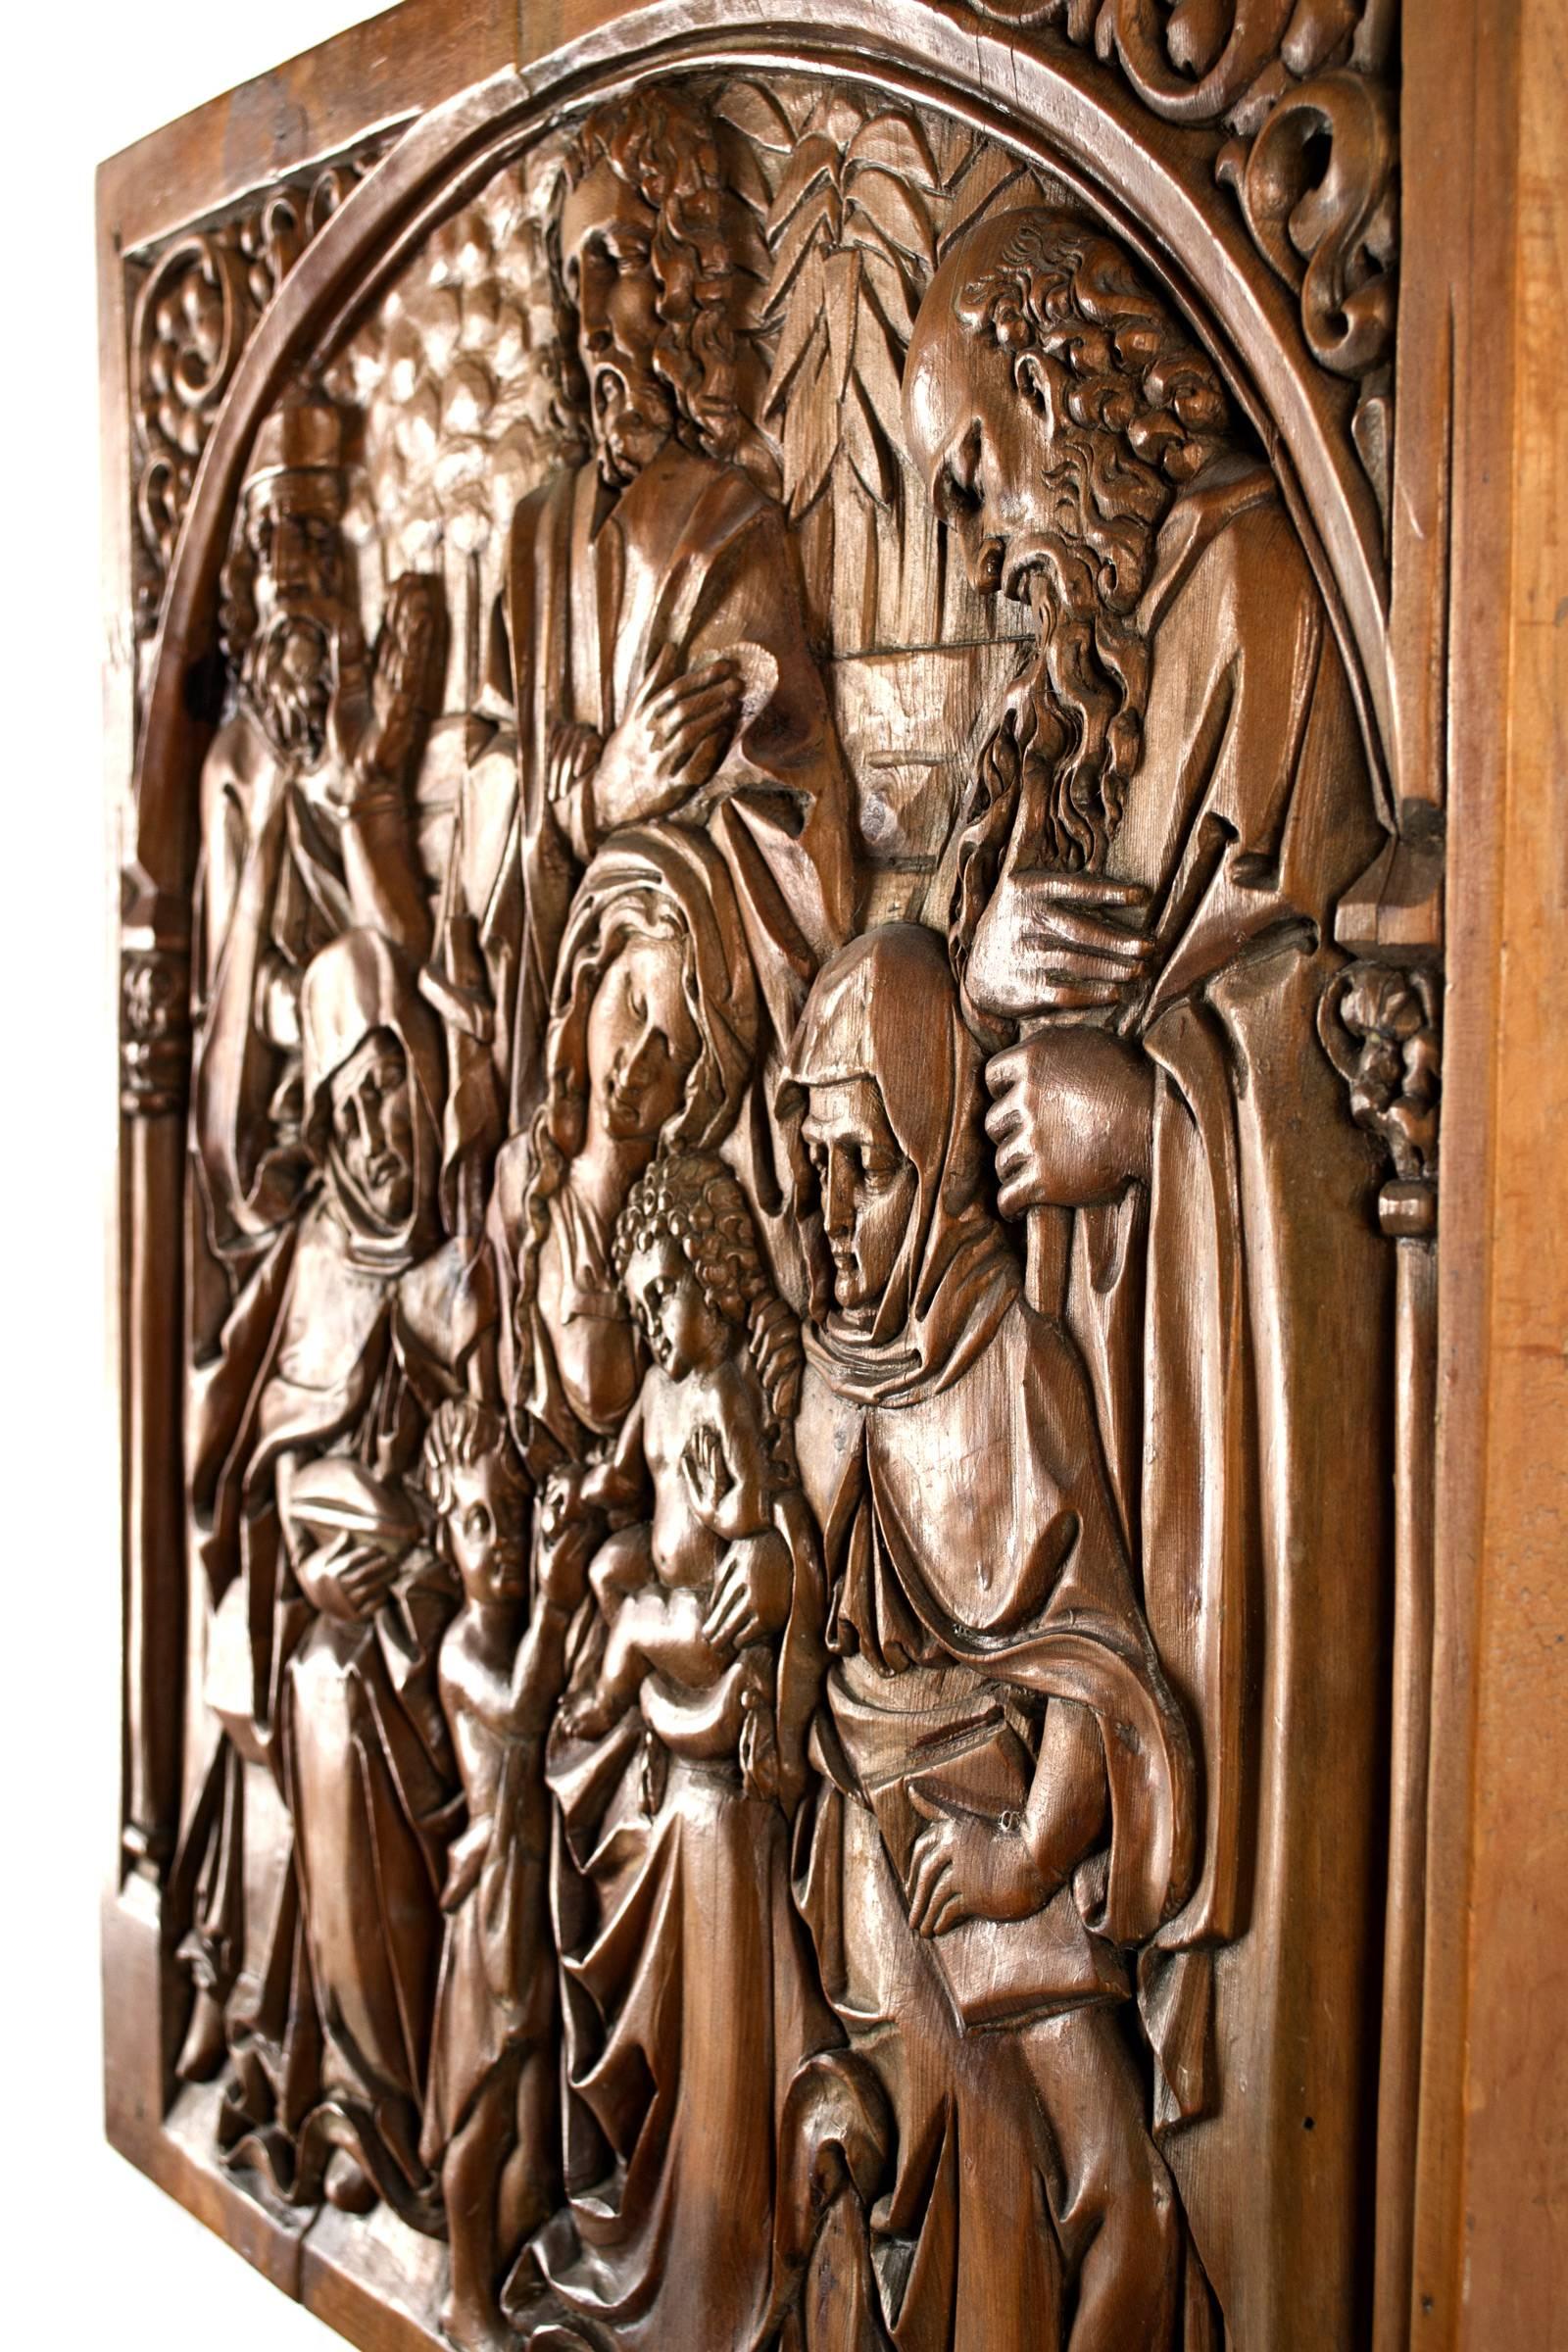 A low-relief sculpture plaque of the Holy Family, Mary sits in the center with the Christ child on her lap and Anne (i.e. Mary's mother) and Elizabeth (i.e. her cousin) on either side together with their husbands. Joseph stands behind as the young